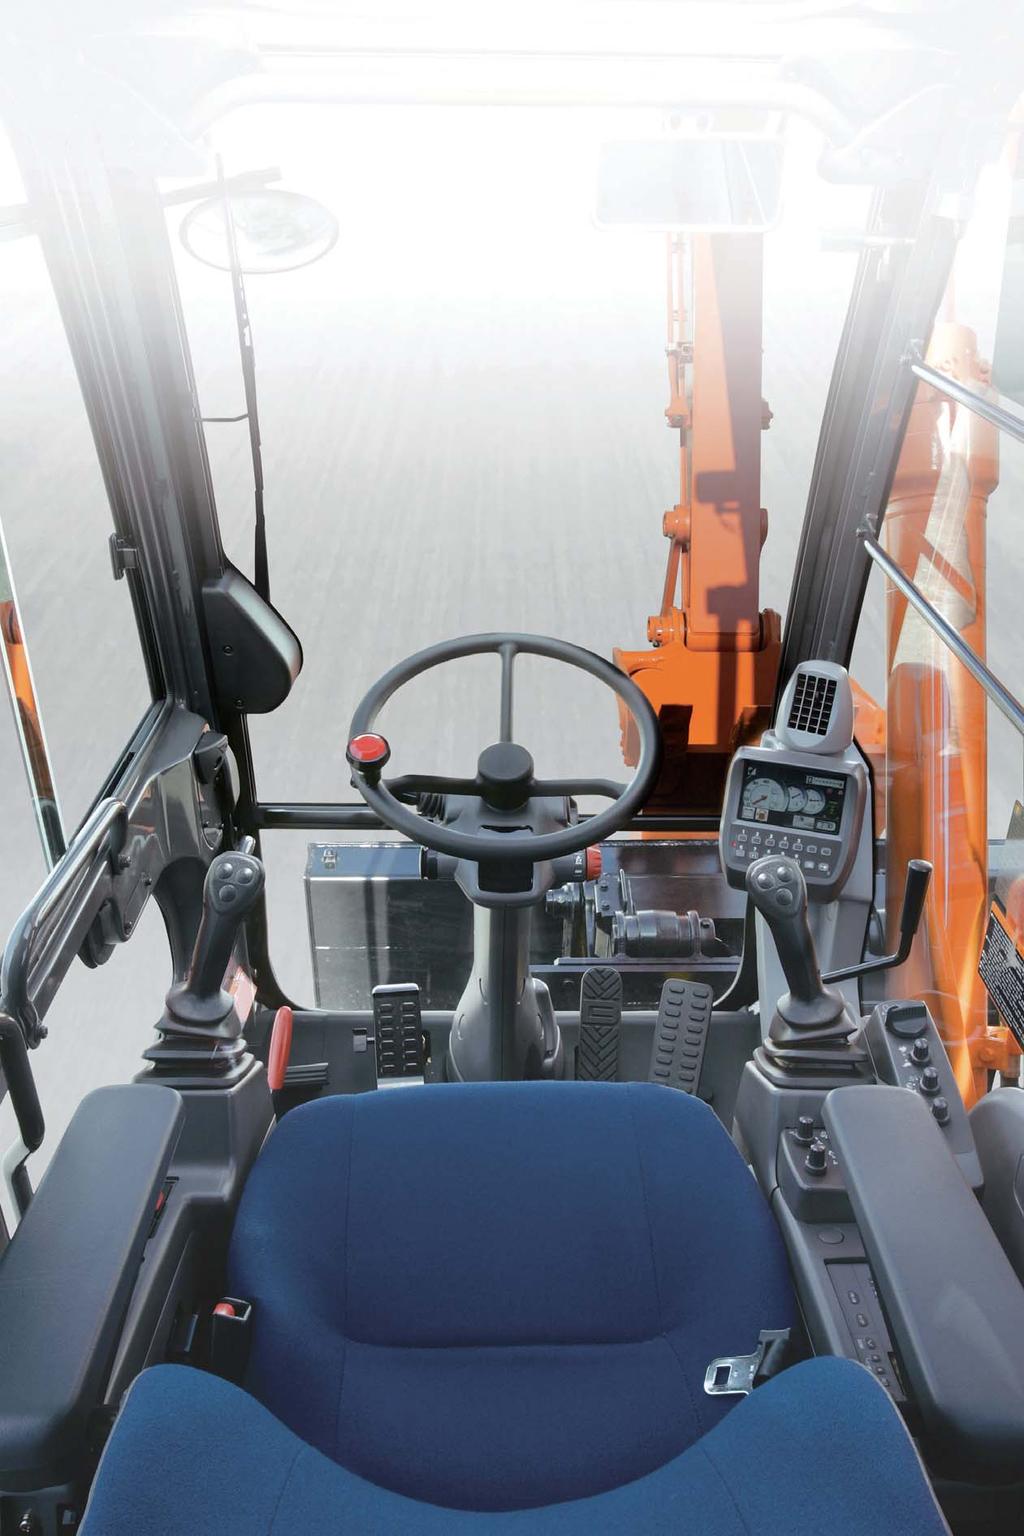 A New Standard in Operator Comfort Good Visibility and Information